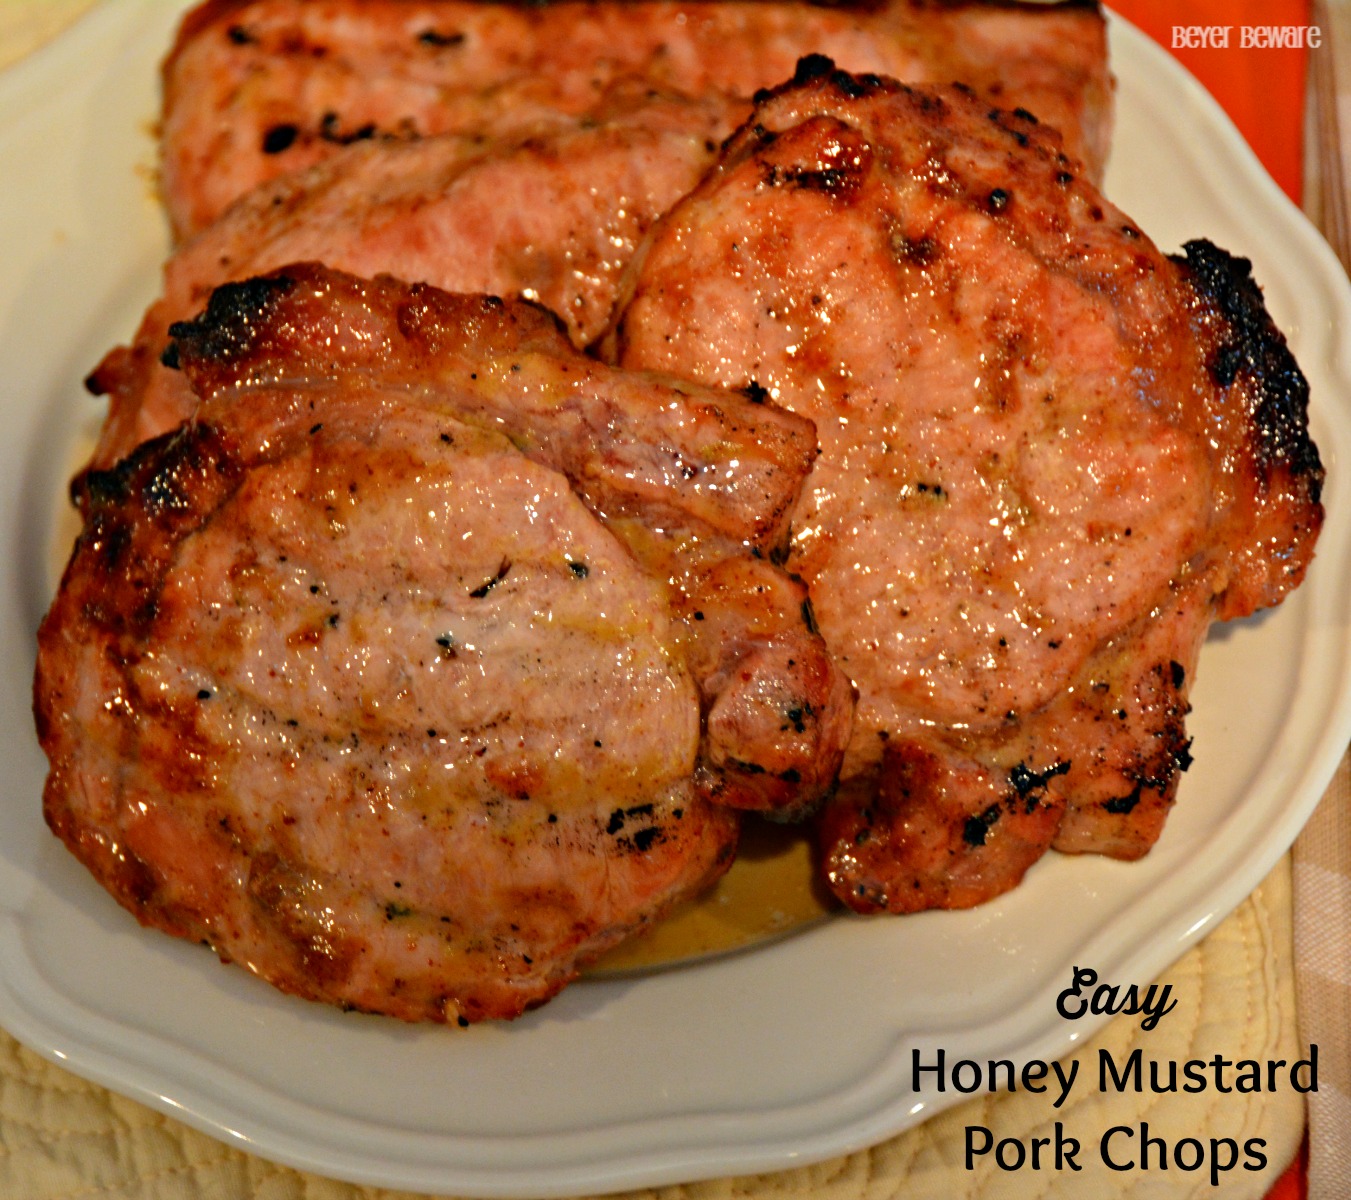 Honey Mustard Pork Chops are a quick and easy recipe that can be grilled or baked.